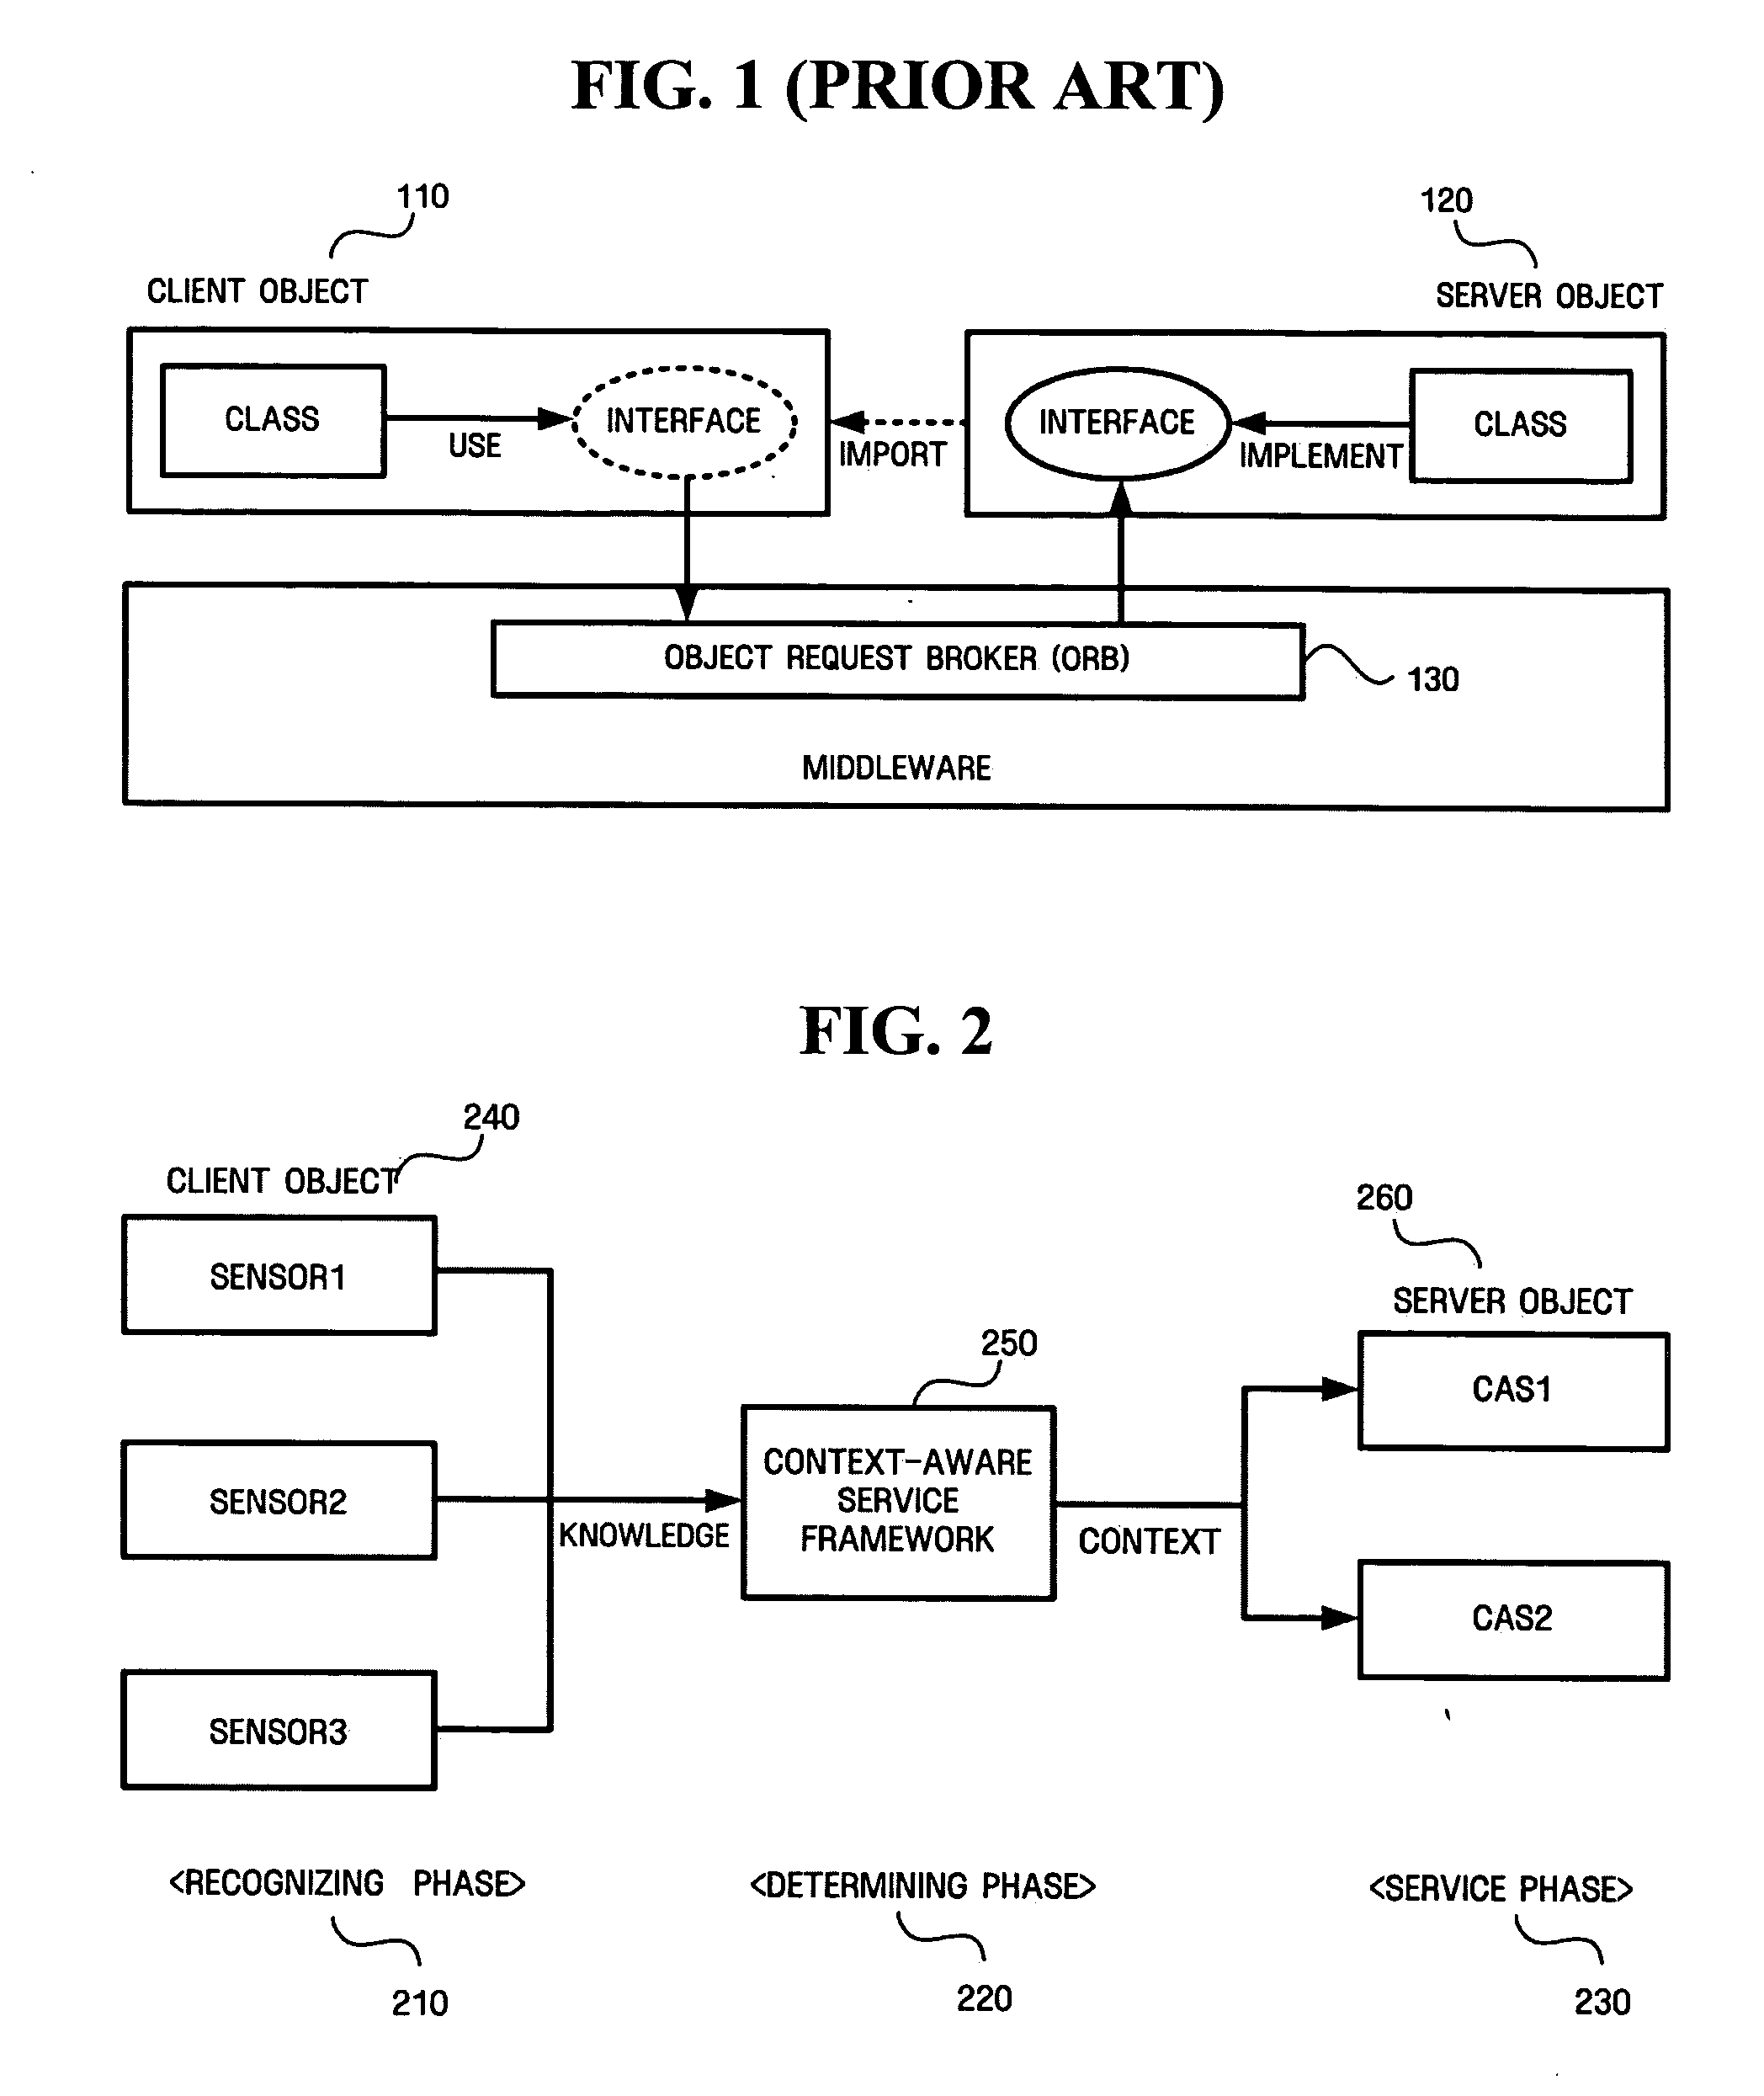 Apparatus and method for providing context-aware service